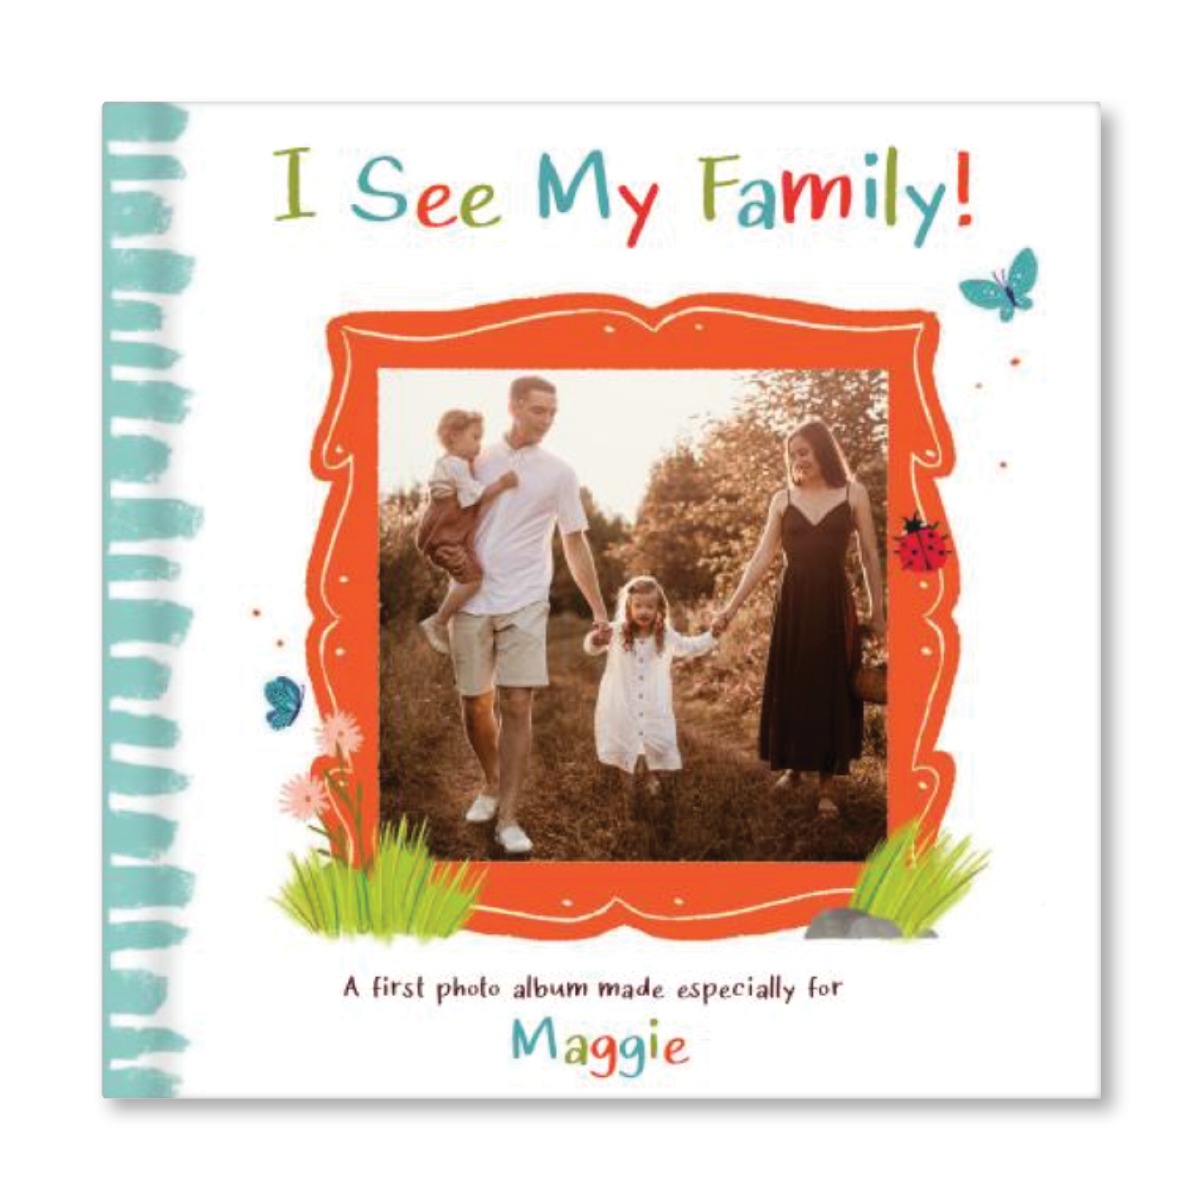 I See My Family! Personalised Photo Board Book